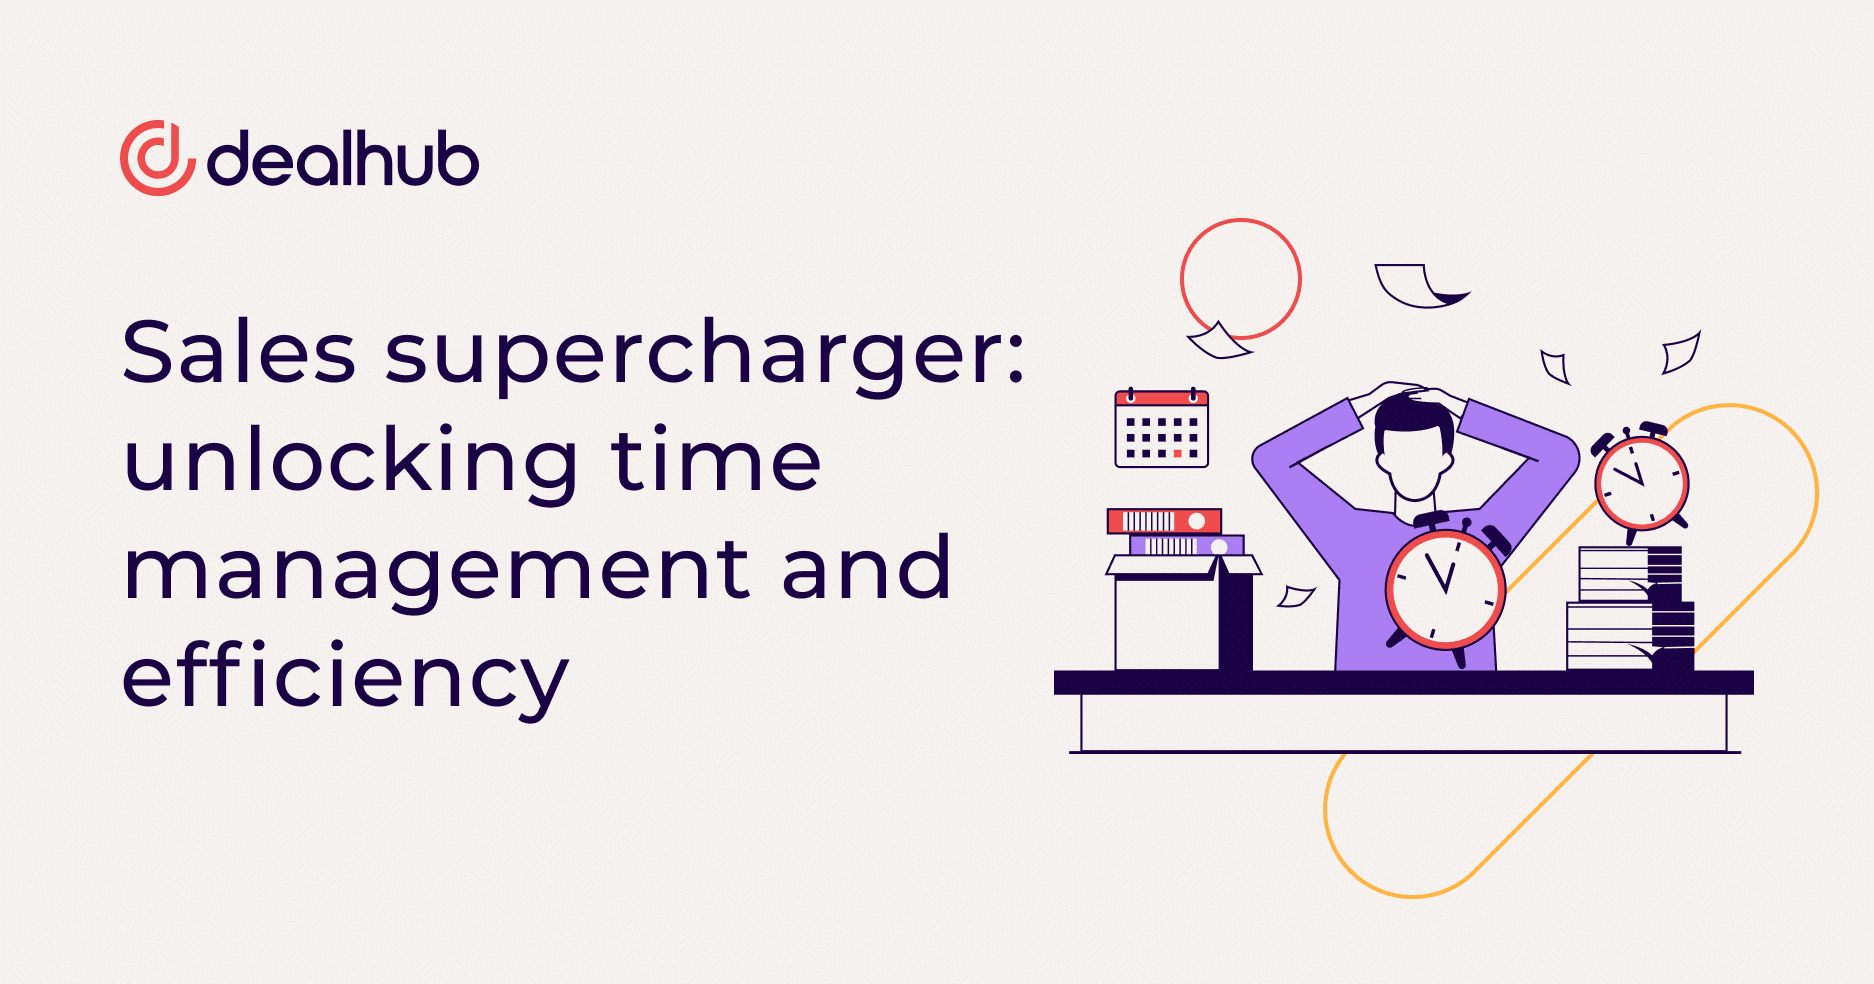 Sales supercharger: unlocking time management and efficiency